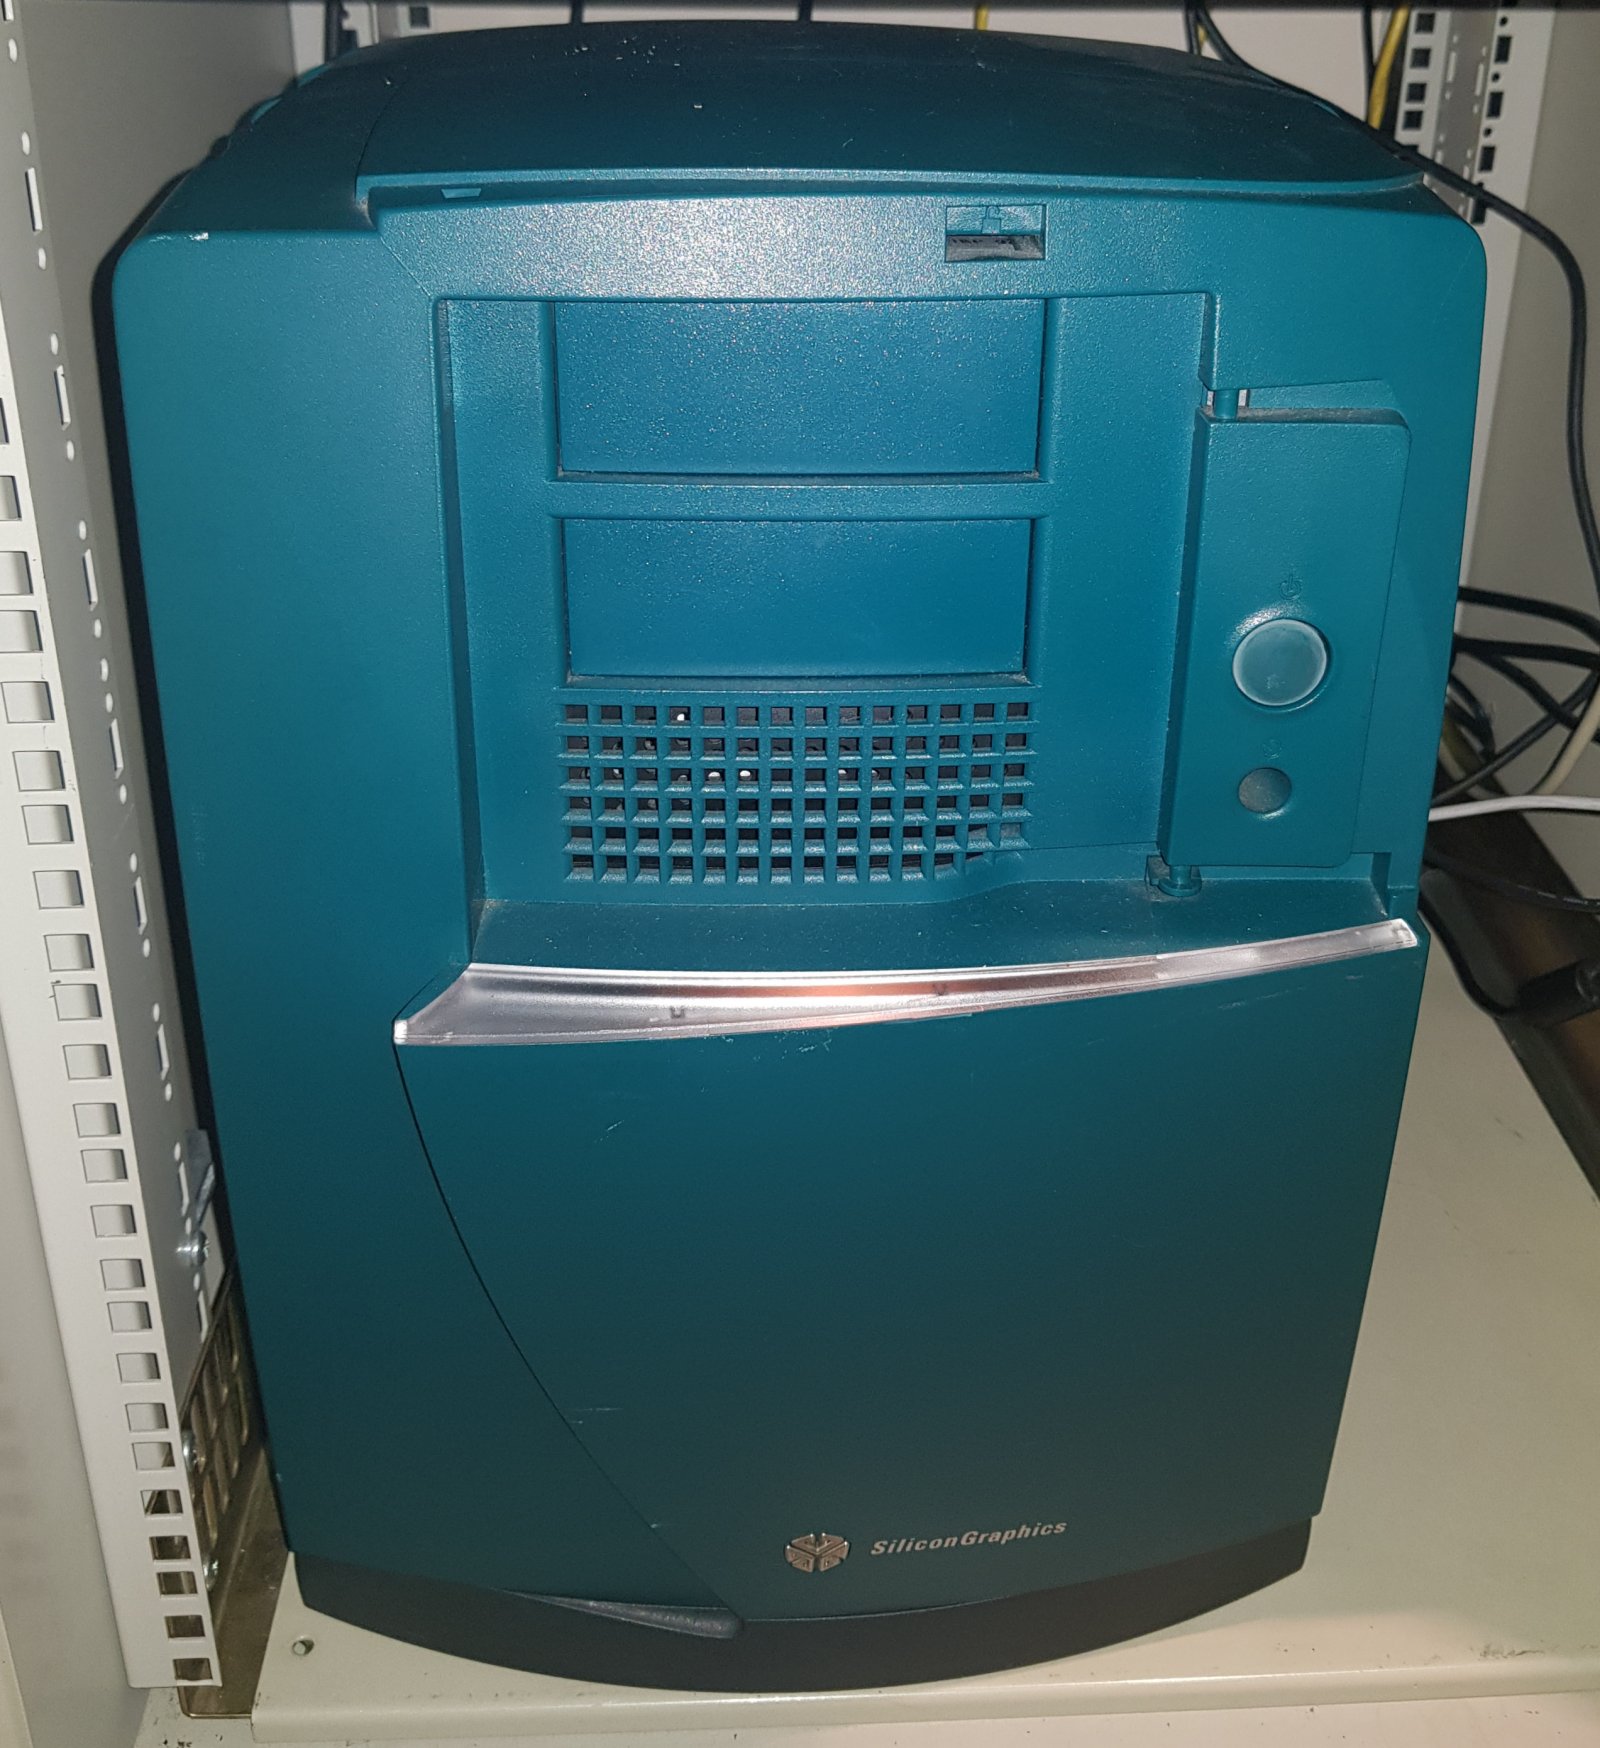 SGI Octane 640Mb with 3 disk drives.